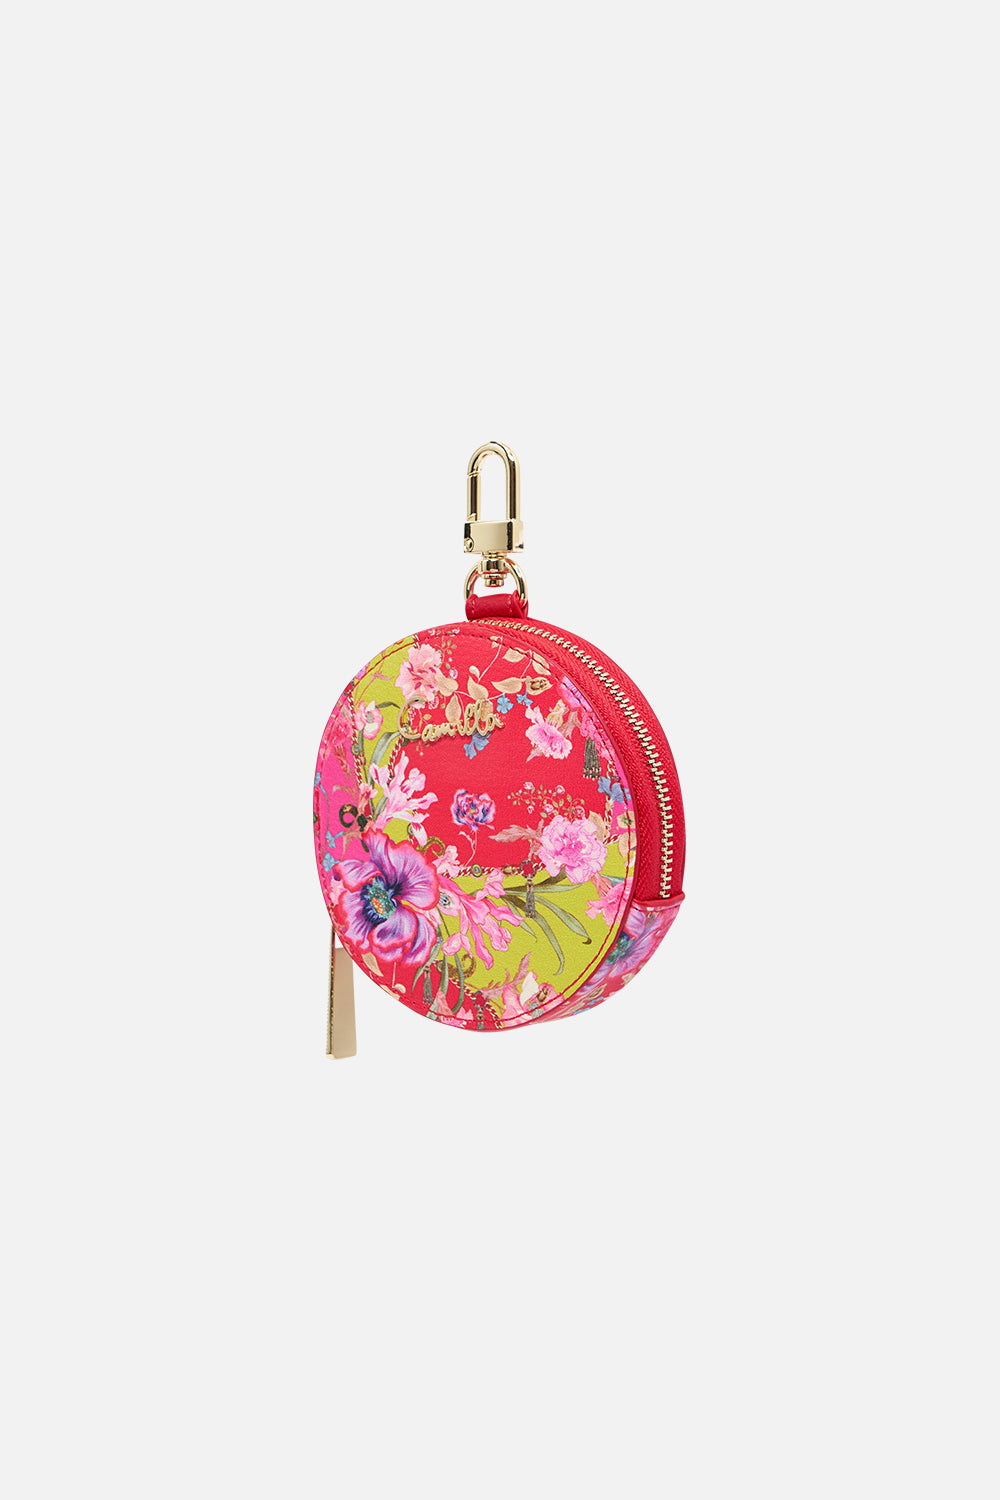 ROUND COIN PURSE THE BEETLES